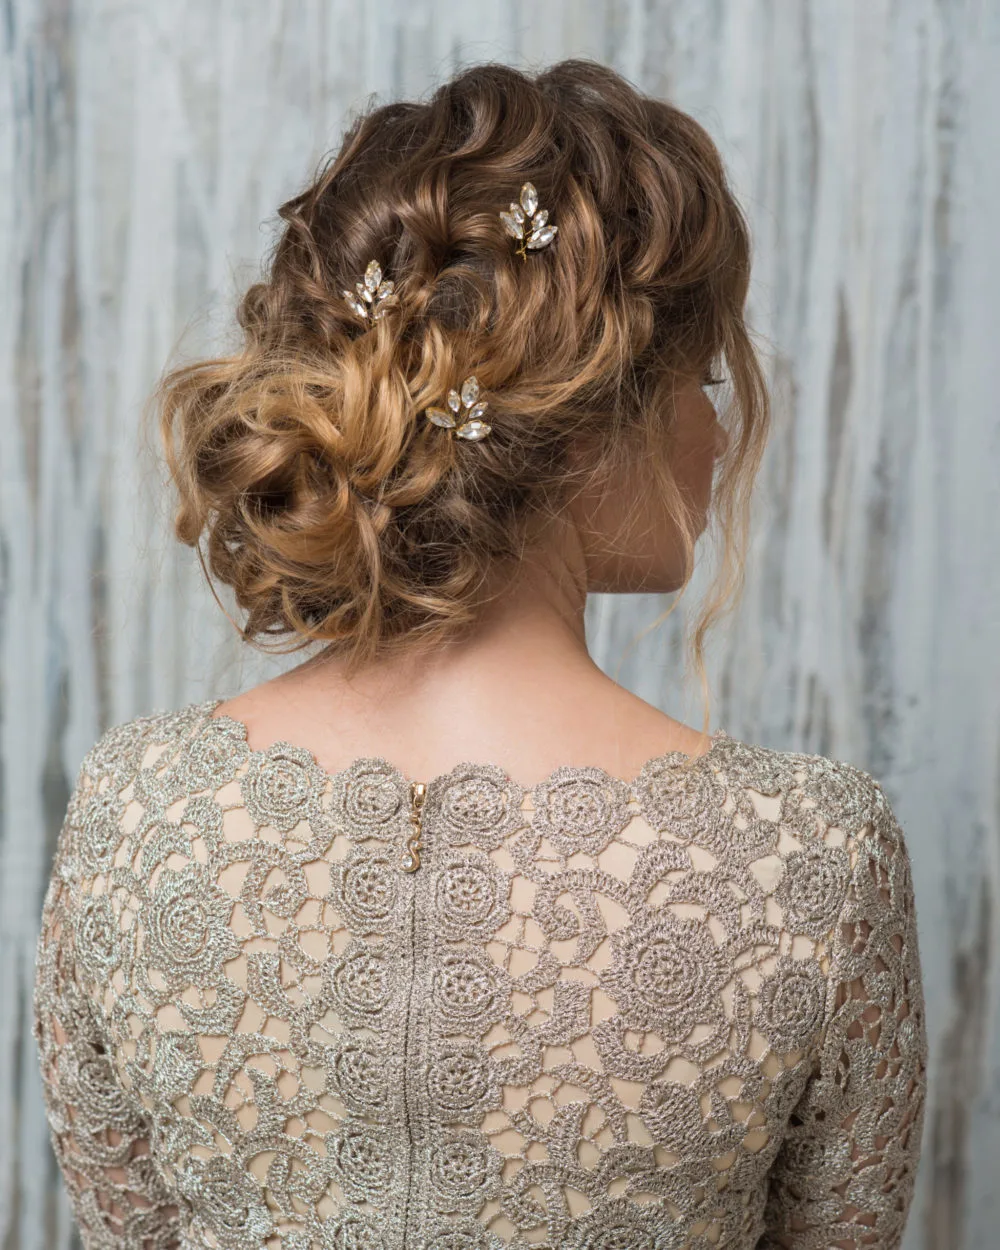 Low Textured Updo With Crystal Accents, a featured mother of the bride hairstyle